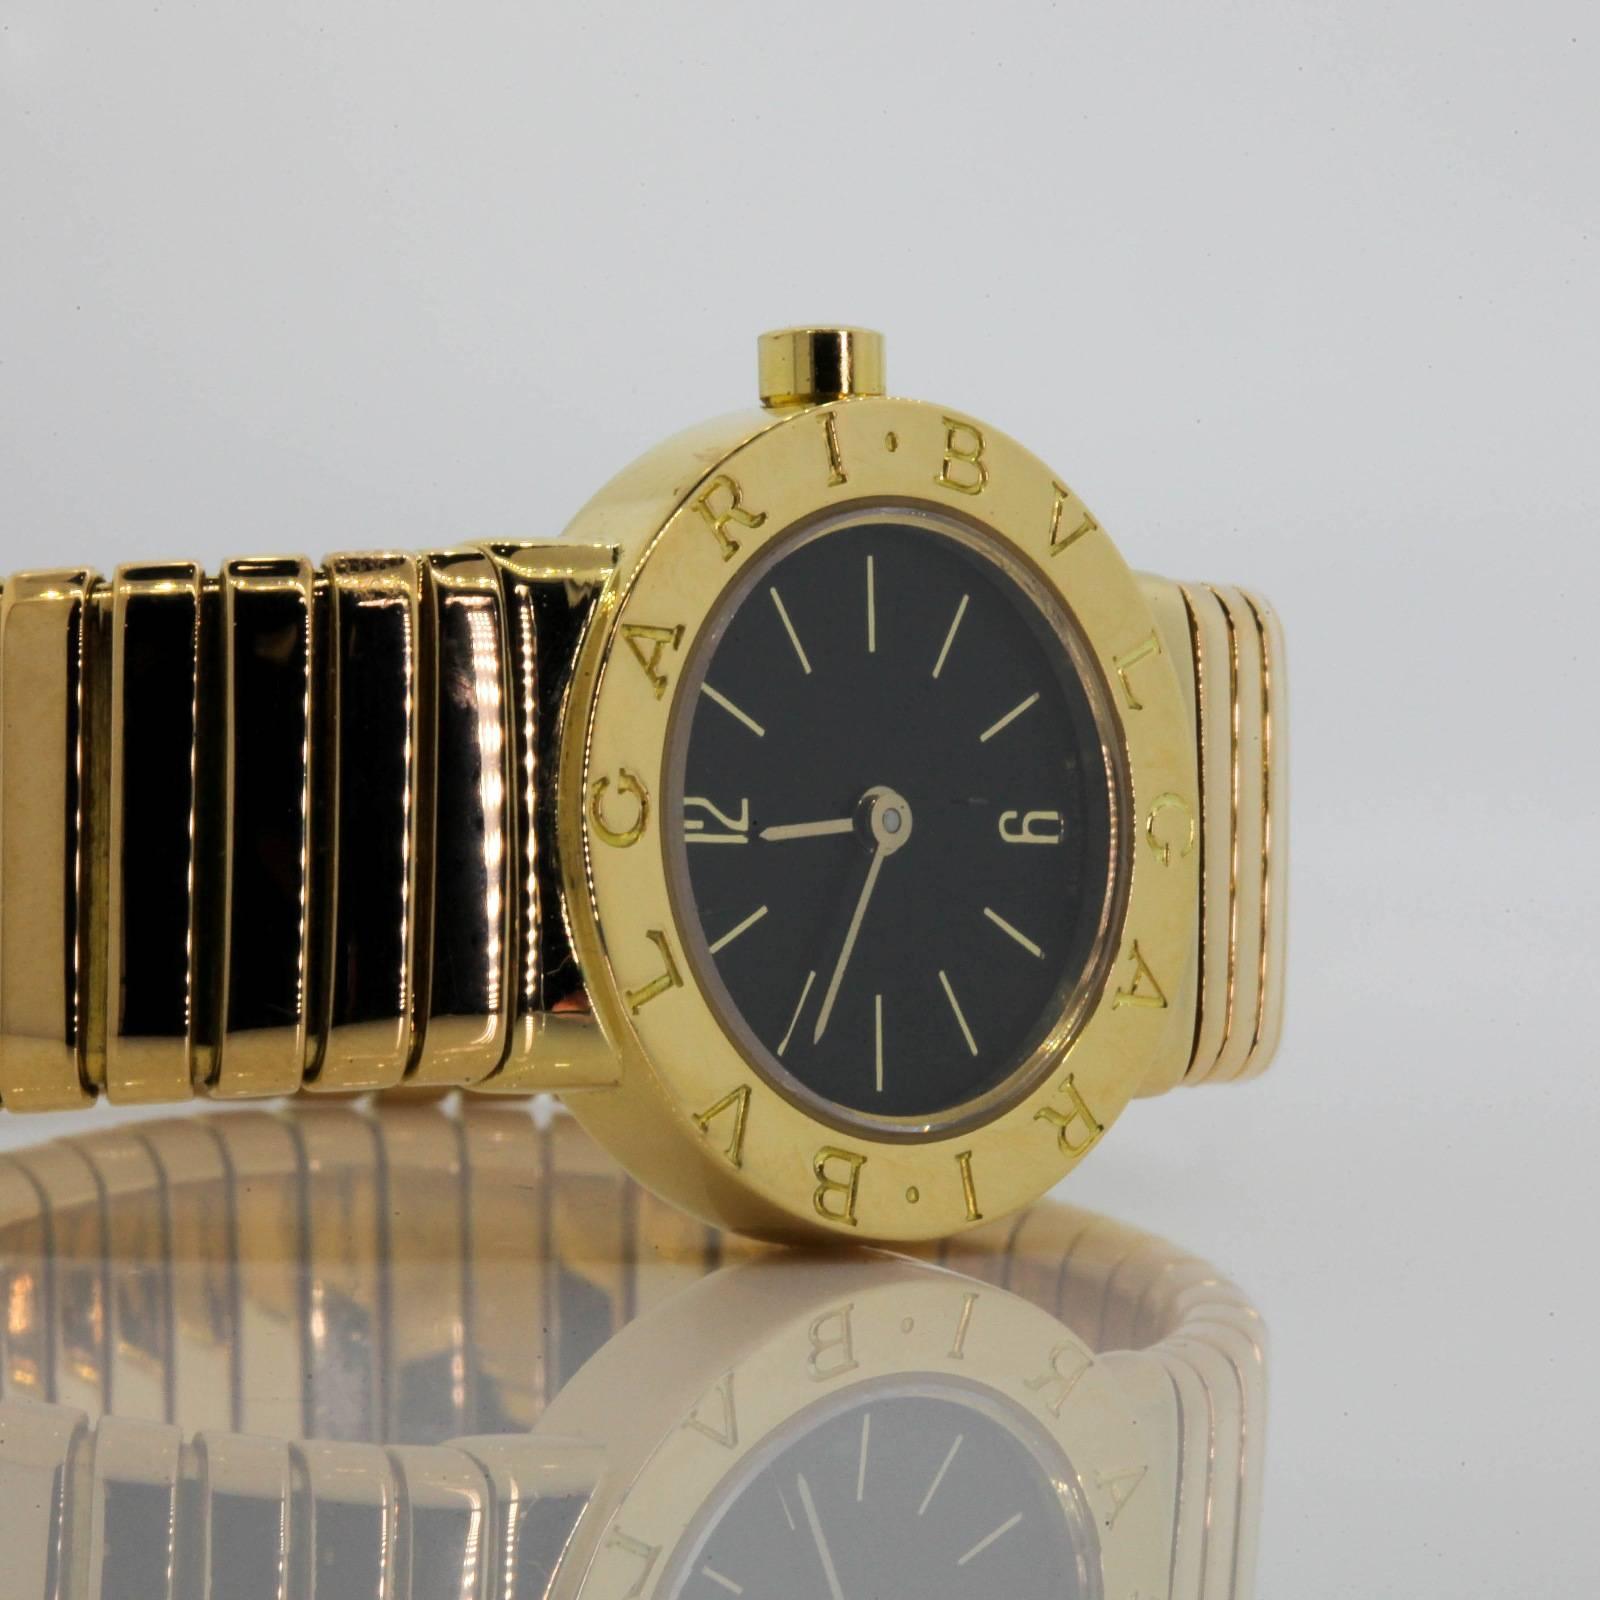 Bvlgari Tubogas 18KT yellow gold watch with 